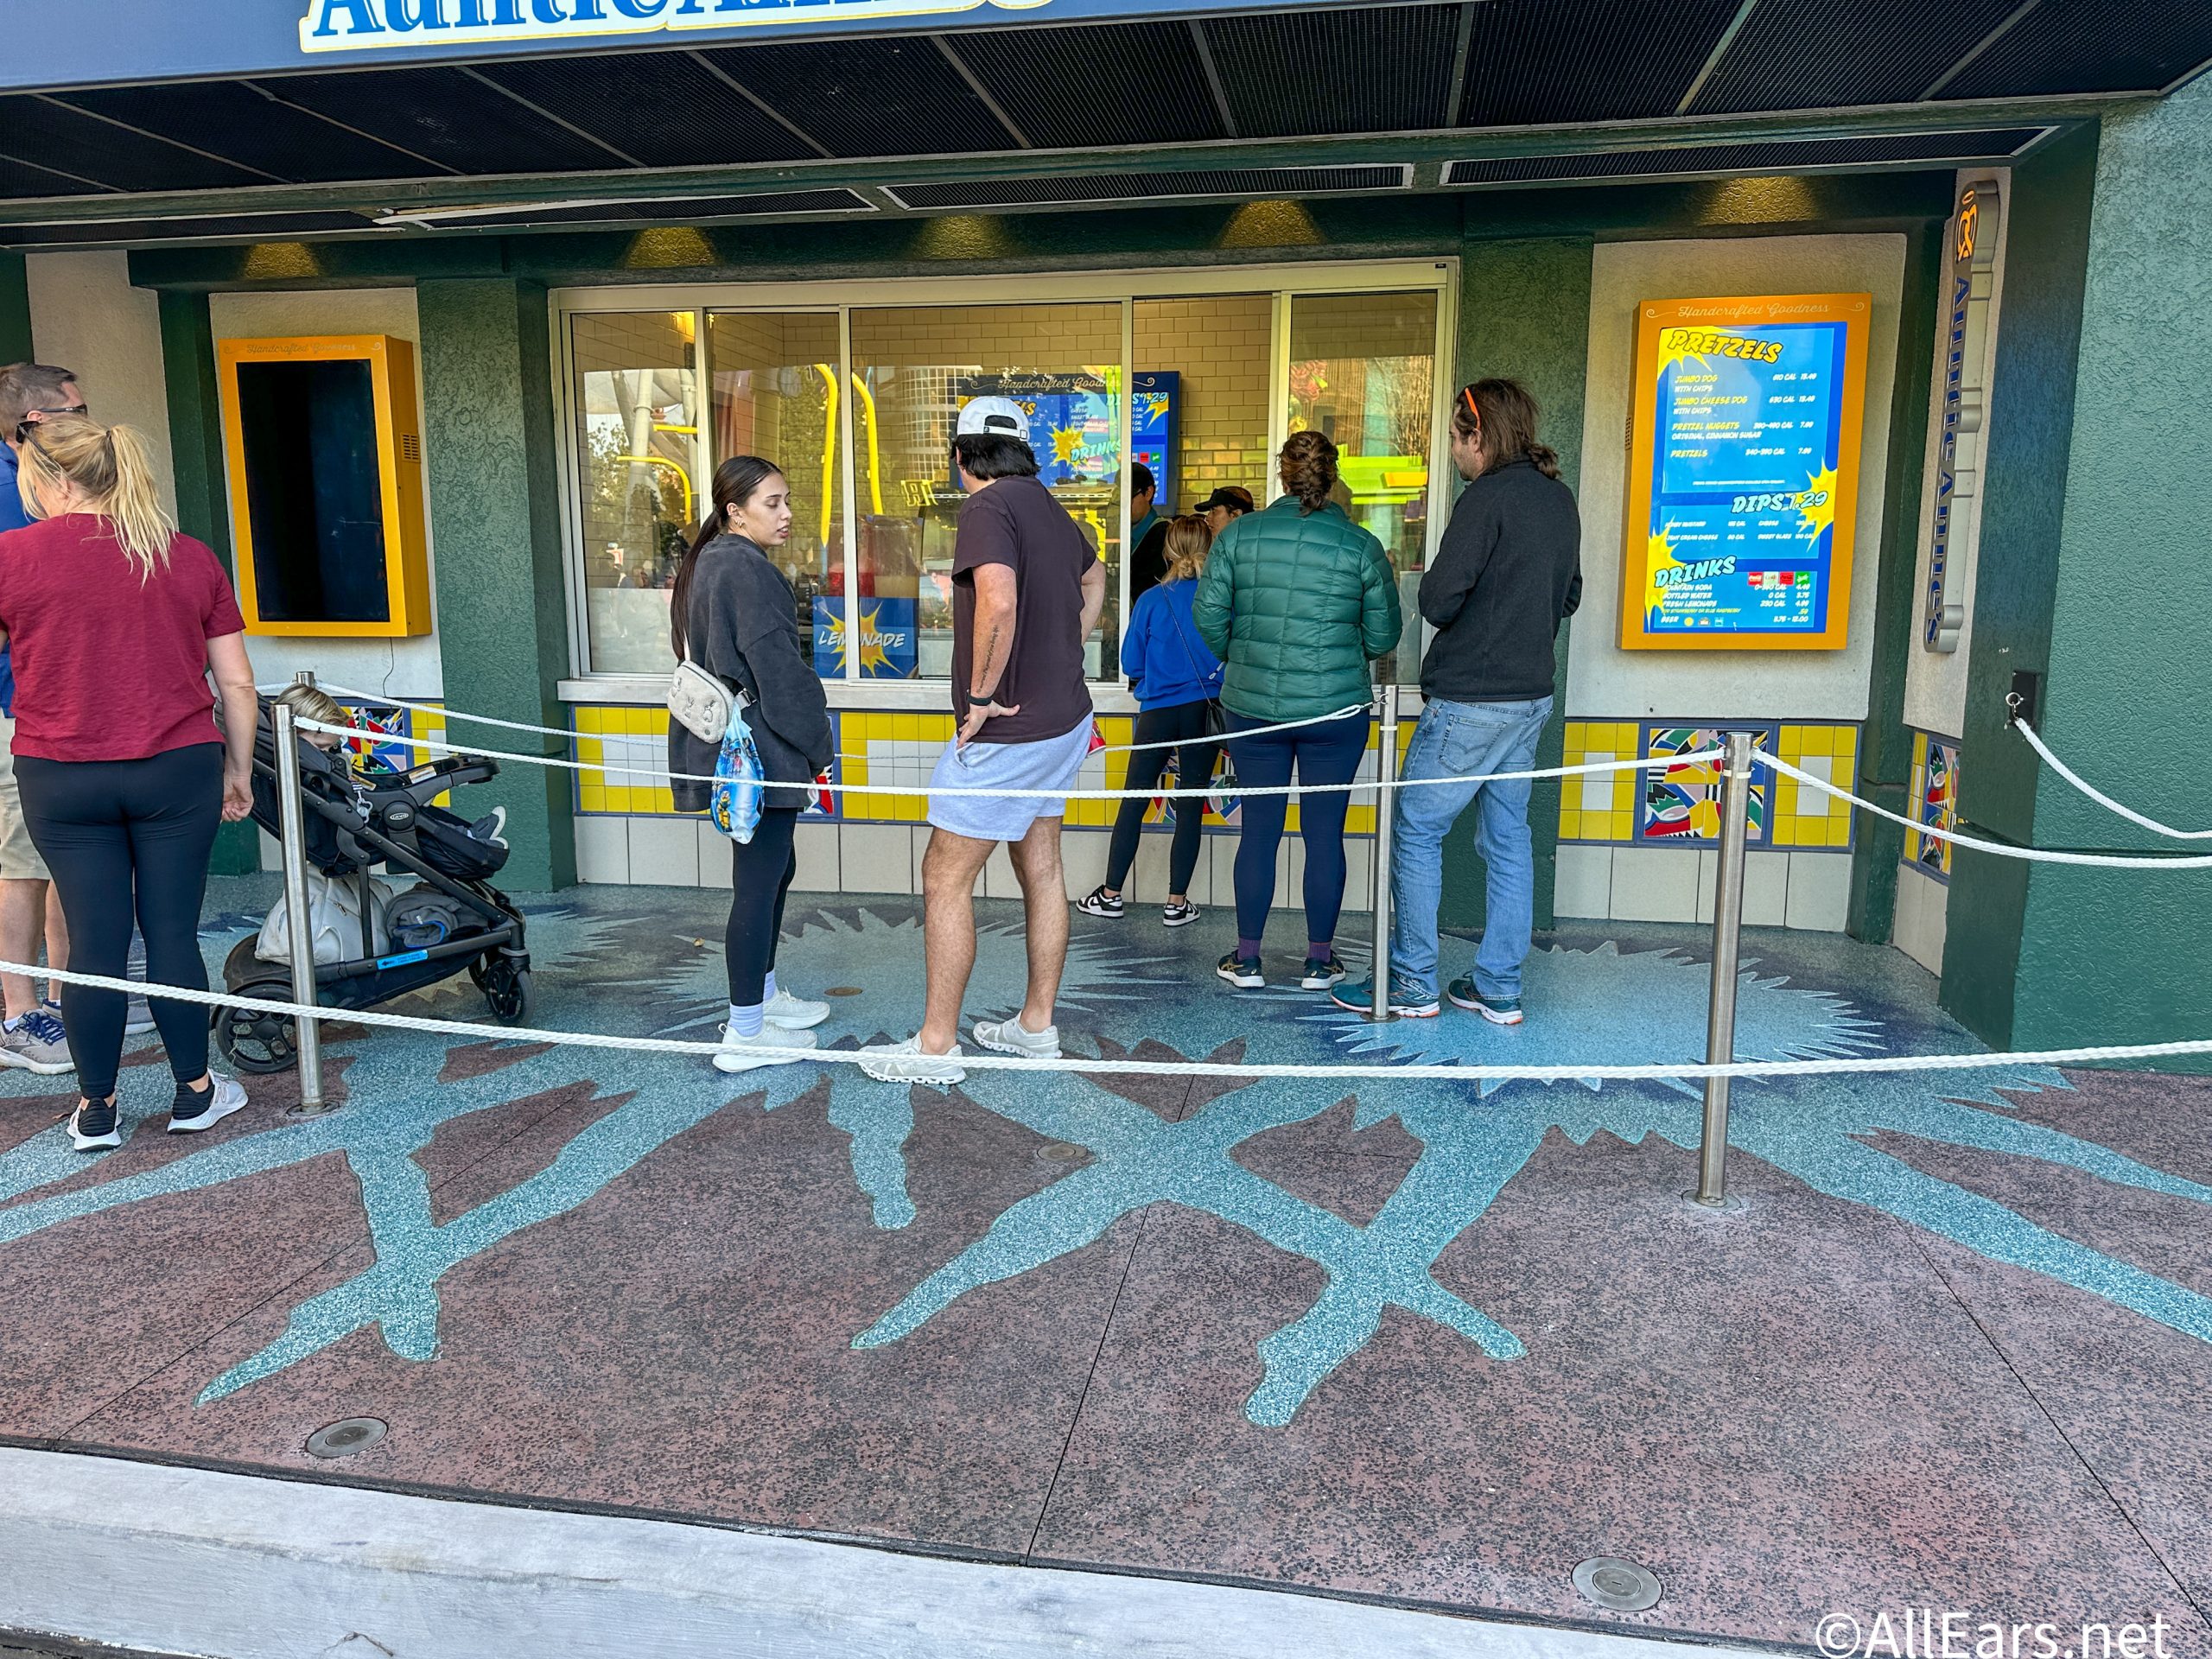 Auntie Anne's (quick-service) at Universal's Islands of Adventure